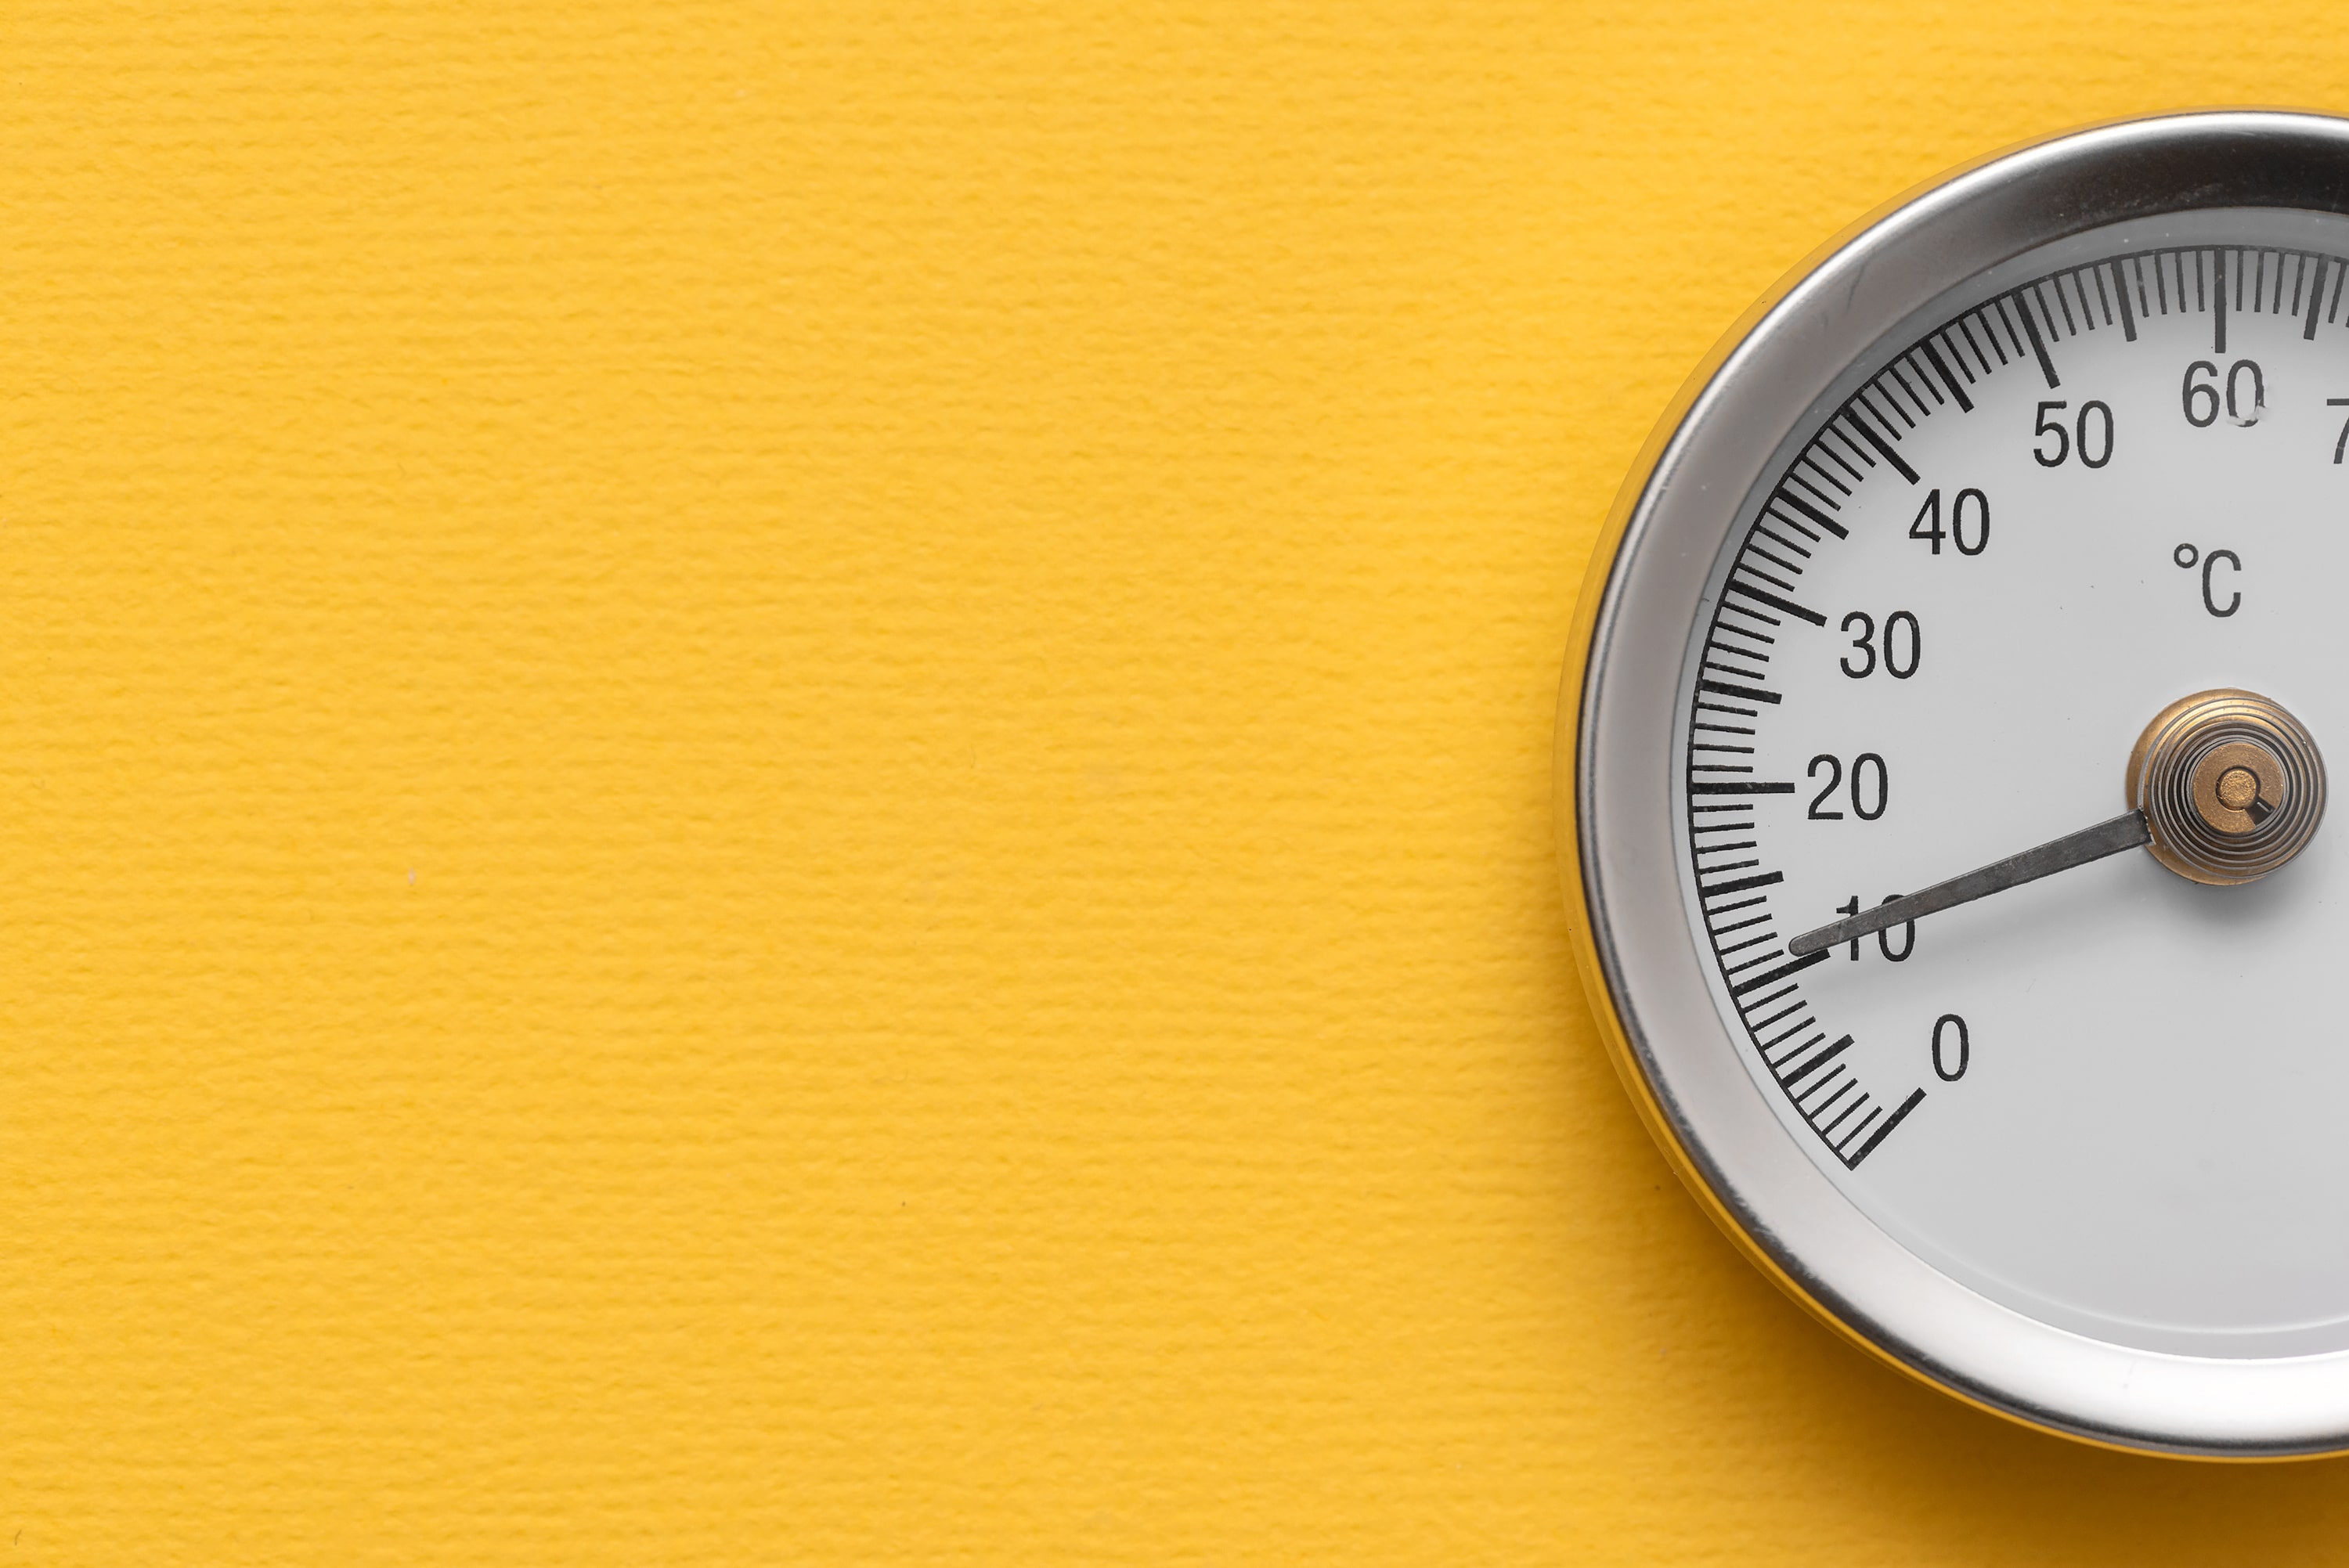 Circular temperature meter on a yellow background